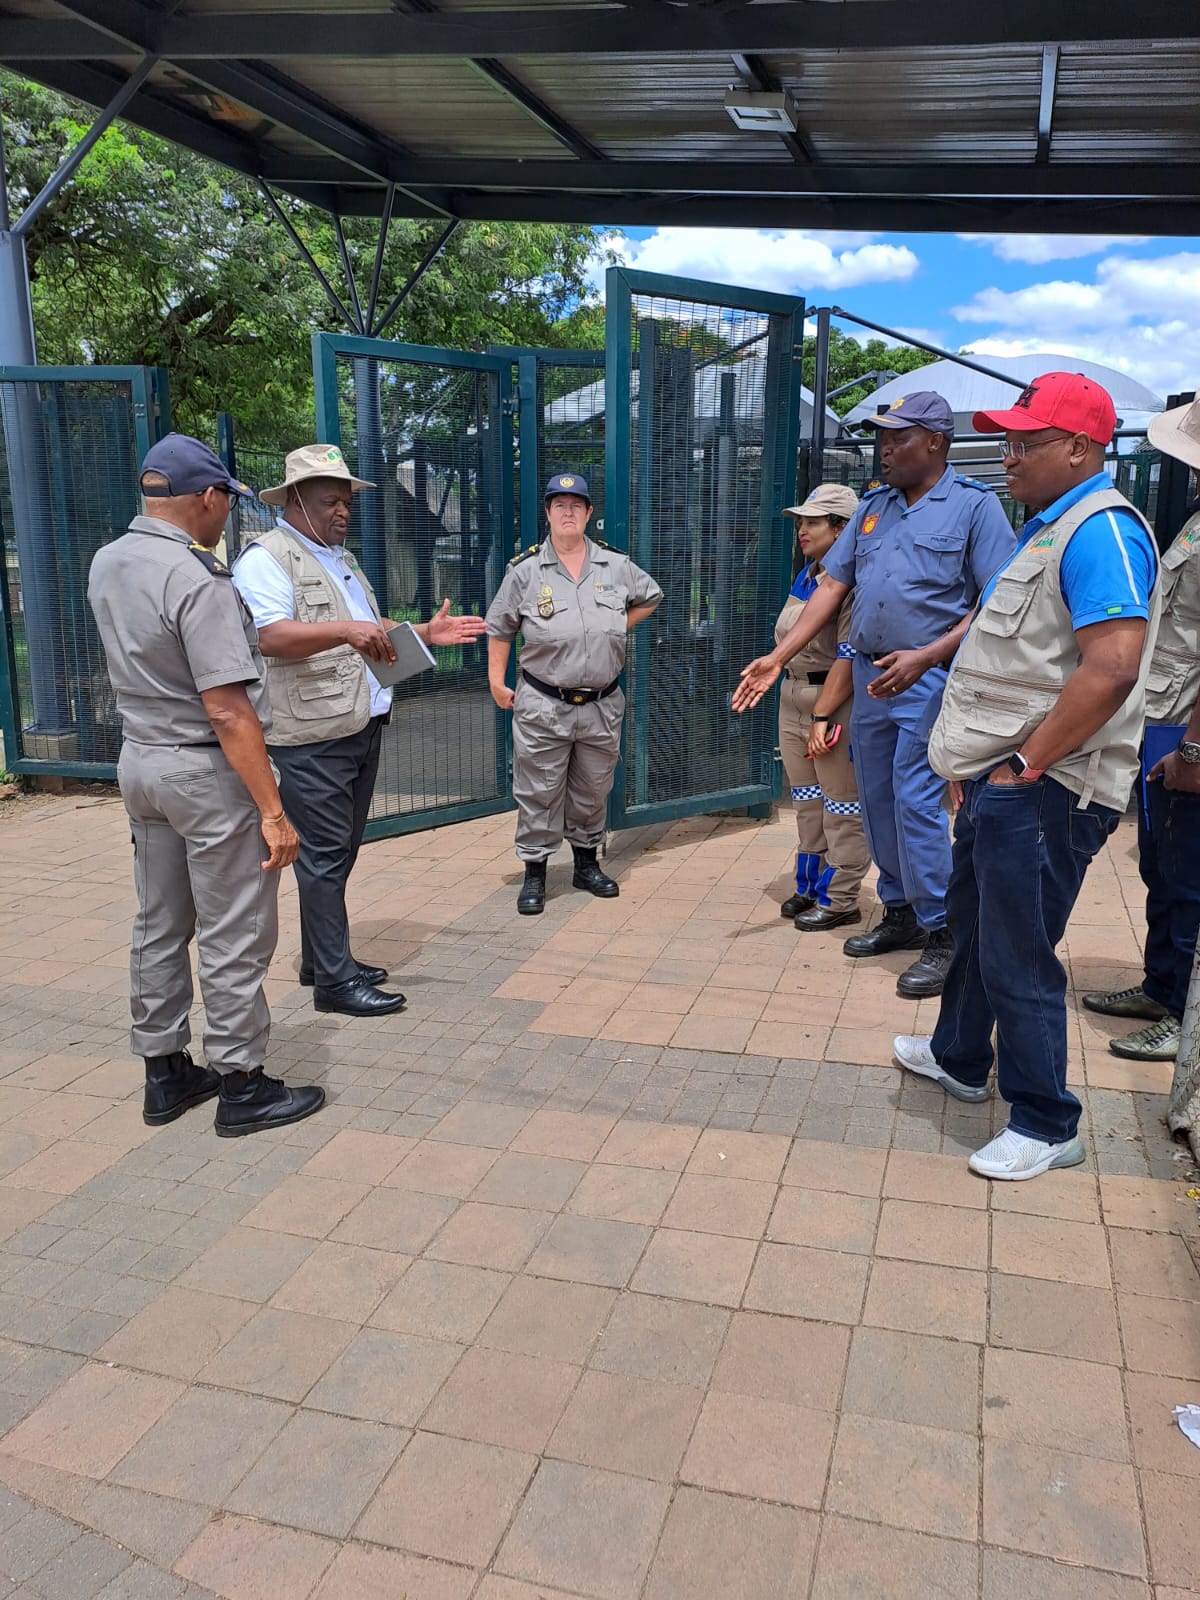 BMA Commissioner, Dr Michael Masiapato; Maj. Gen (rtd) David Chilembe and senior officials inspecting port facilities at Lebombo Port of Entry during the 2022/23 Festive Season.